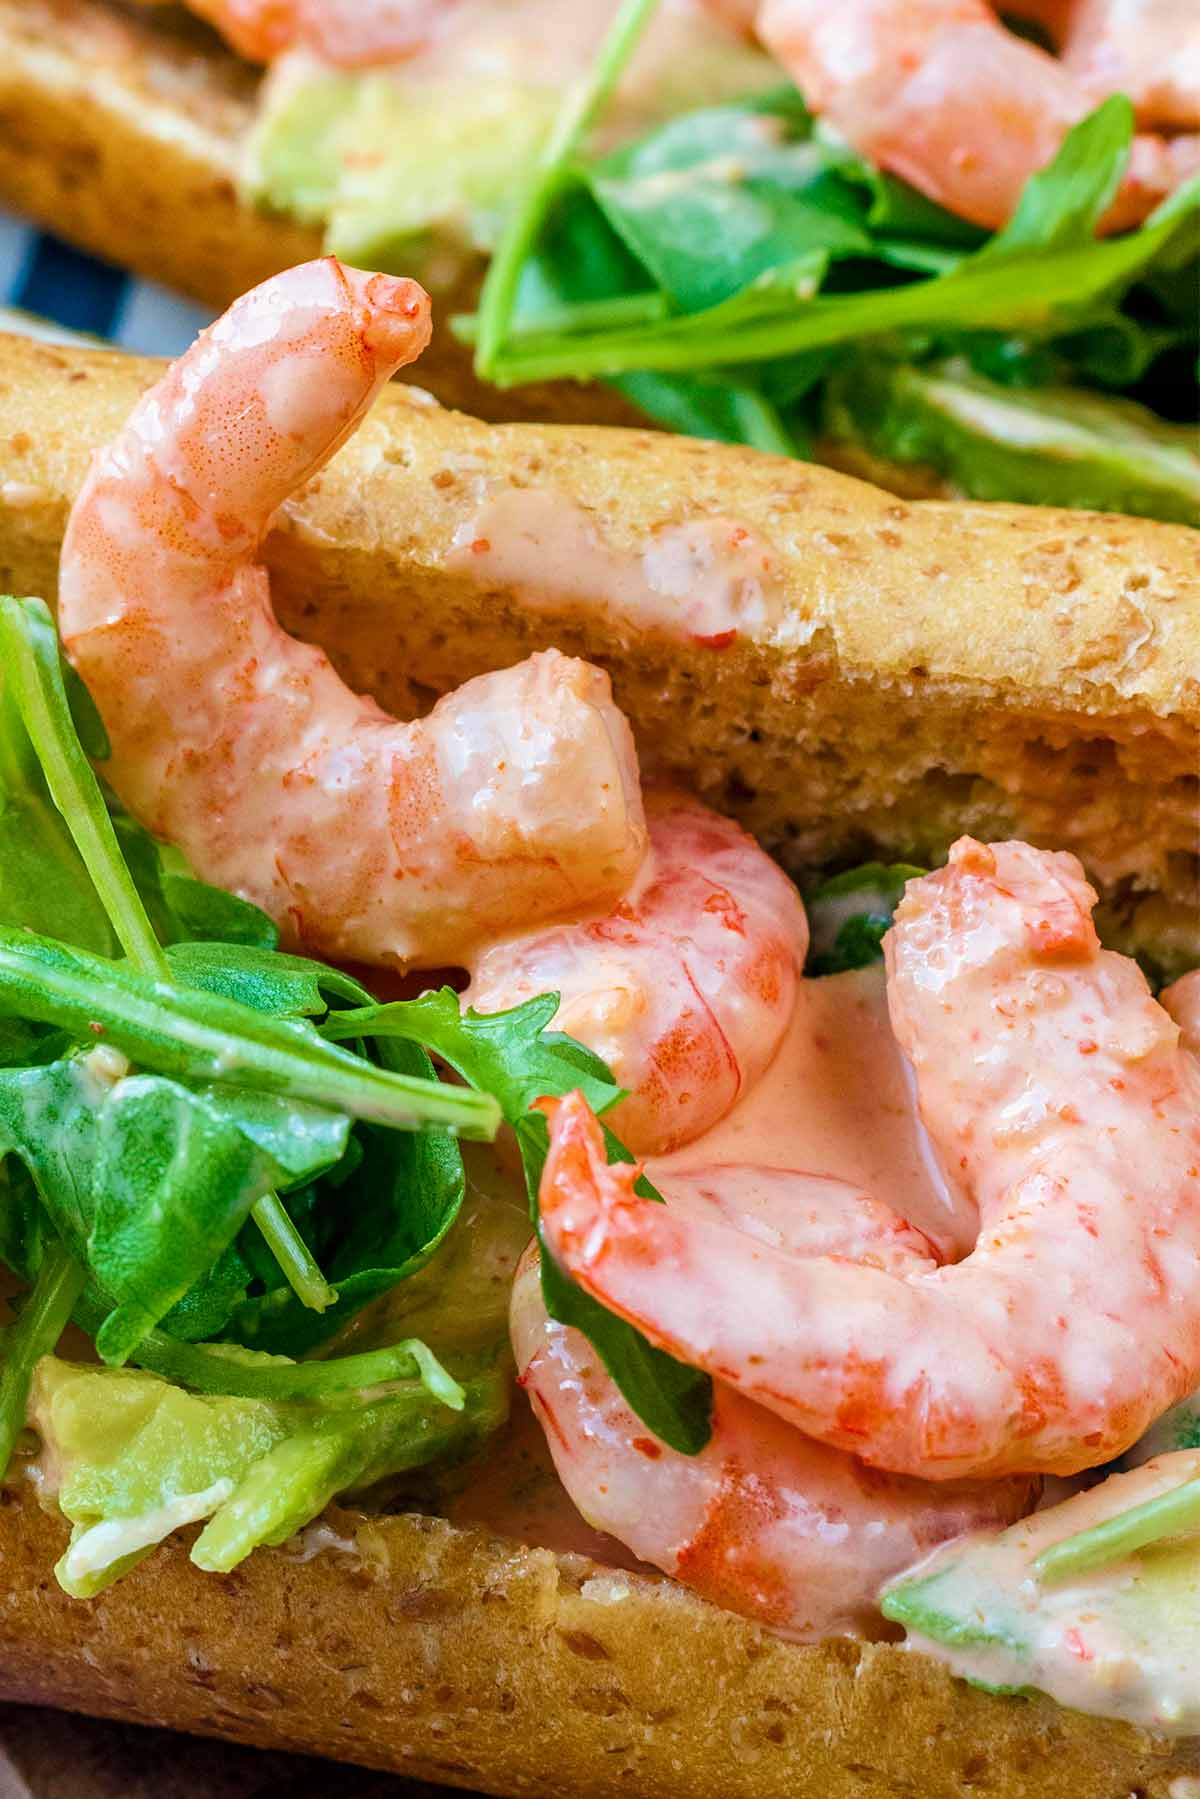 Prawns in a creamy sauce in a sandwich with lettuce.